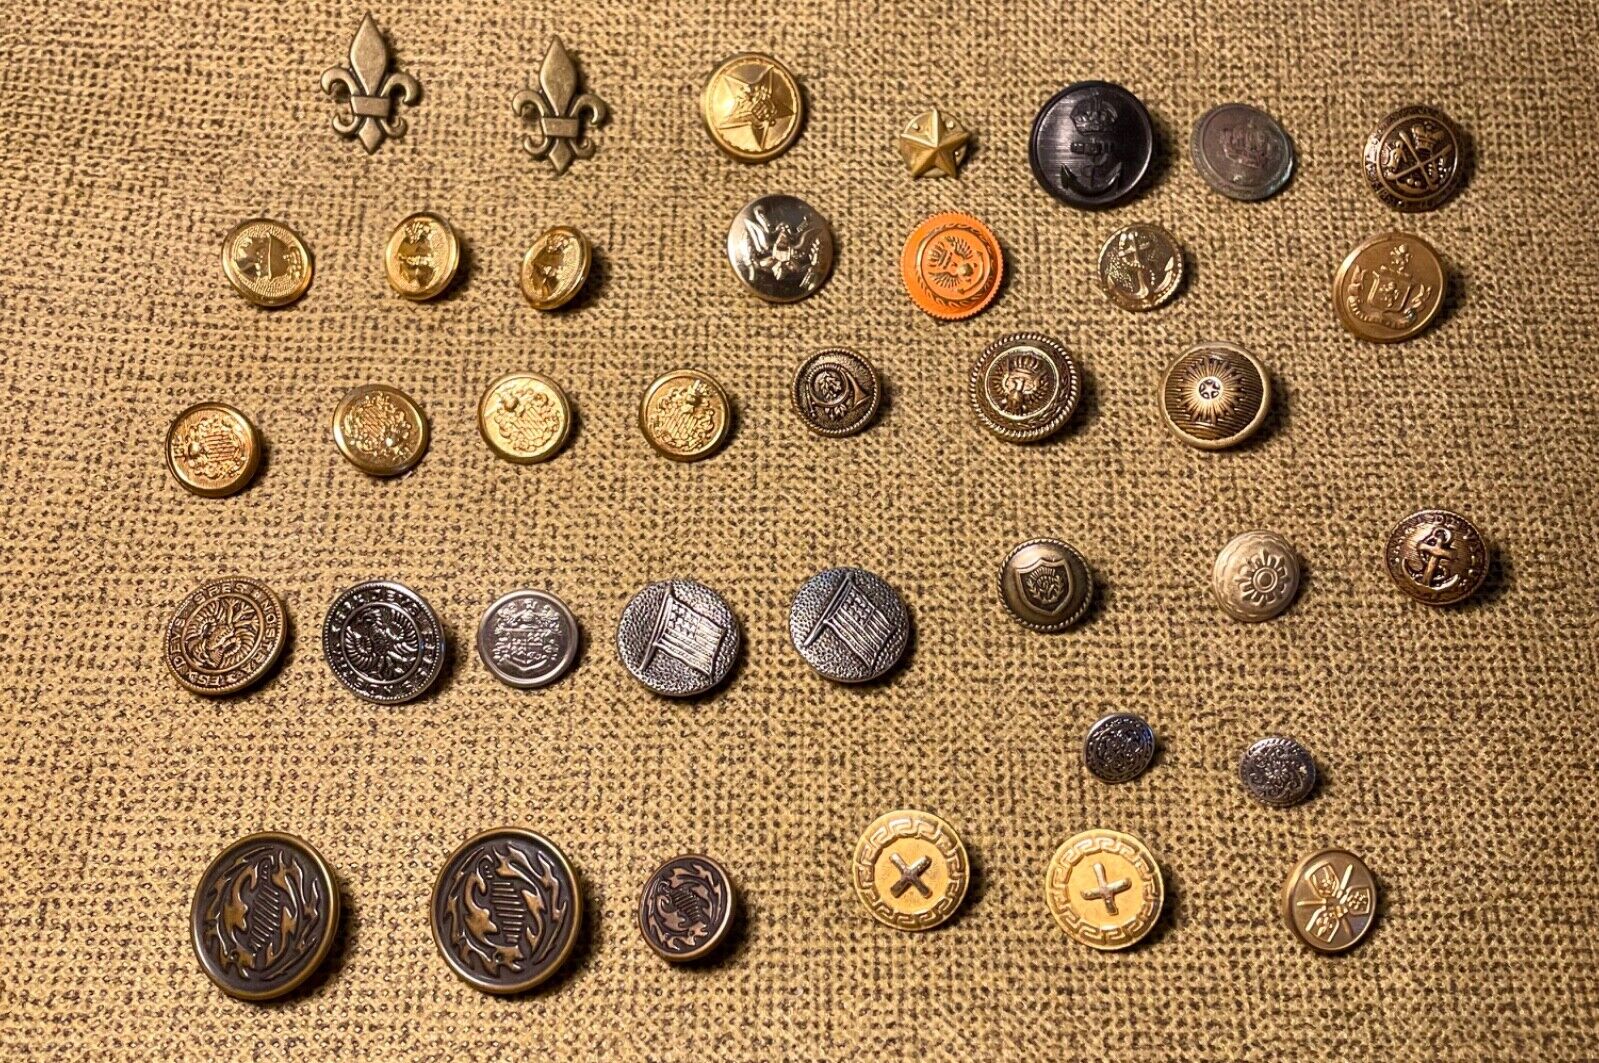 Vintage Military era buttons & pins various sizes shapes (lot of 37) #004